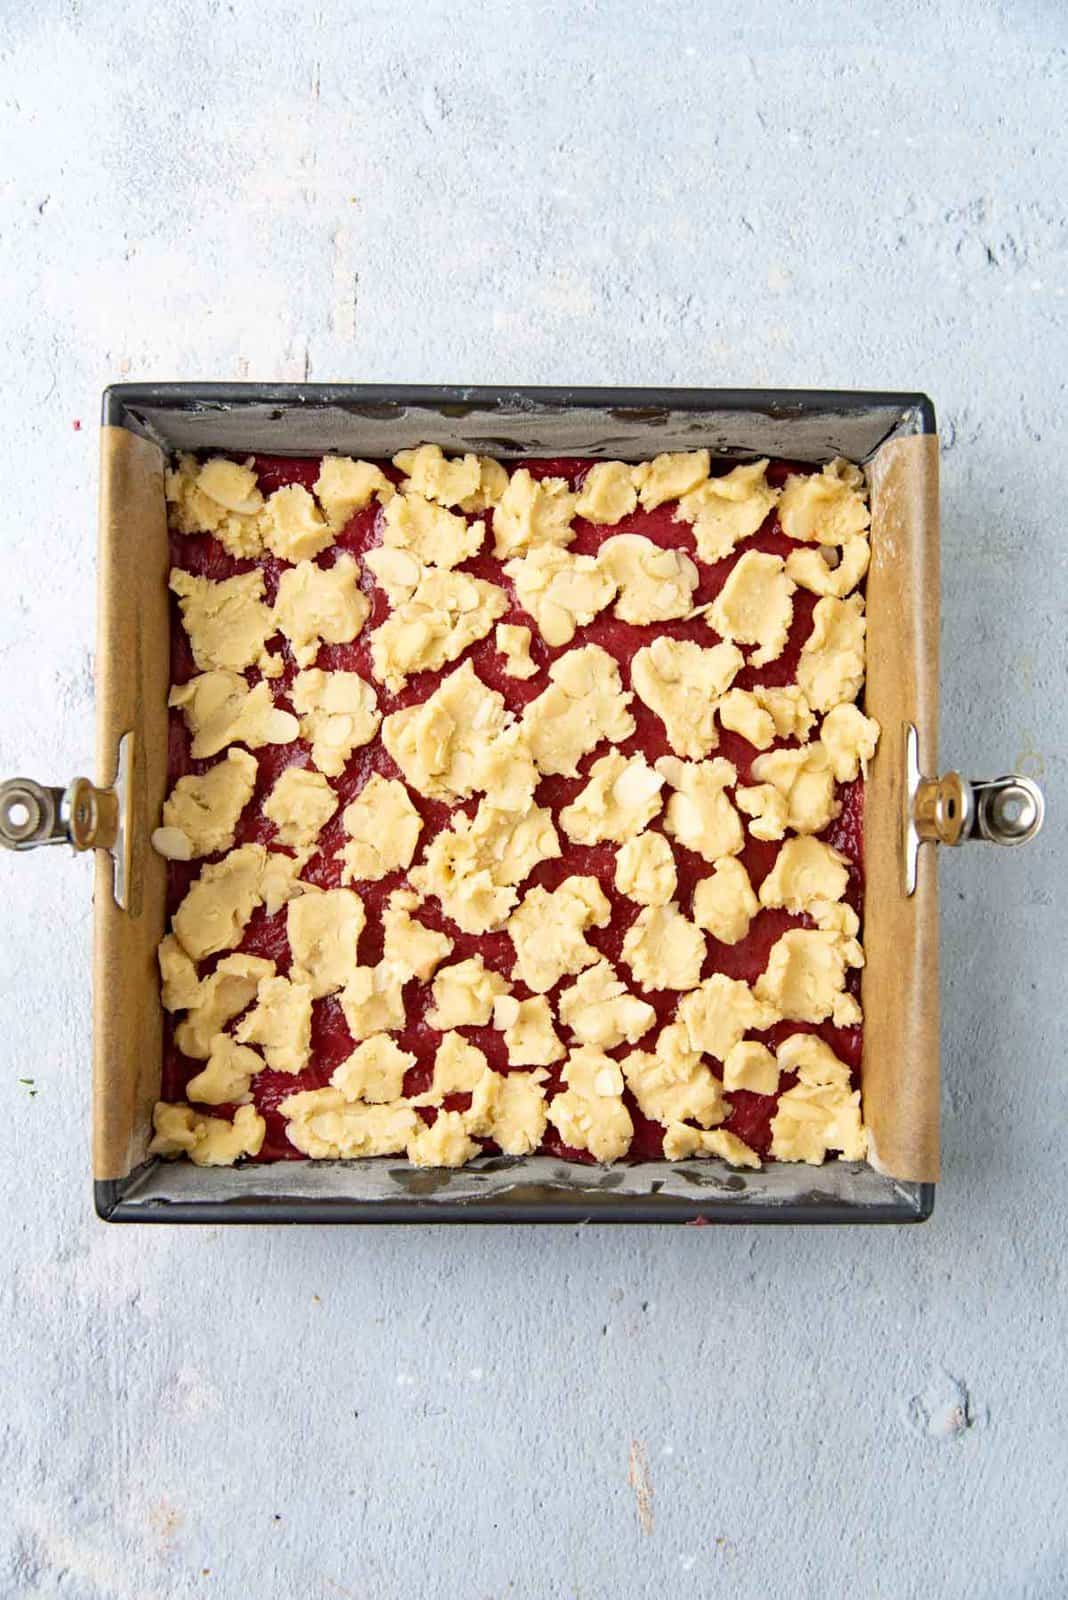 The rhubarb bars with the shortbread crumble topping.